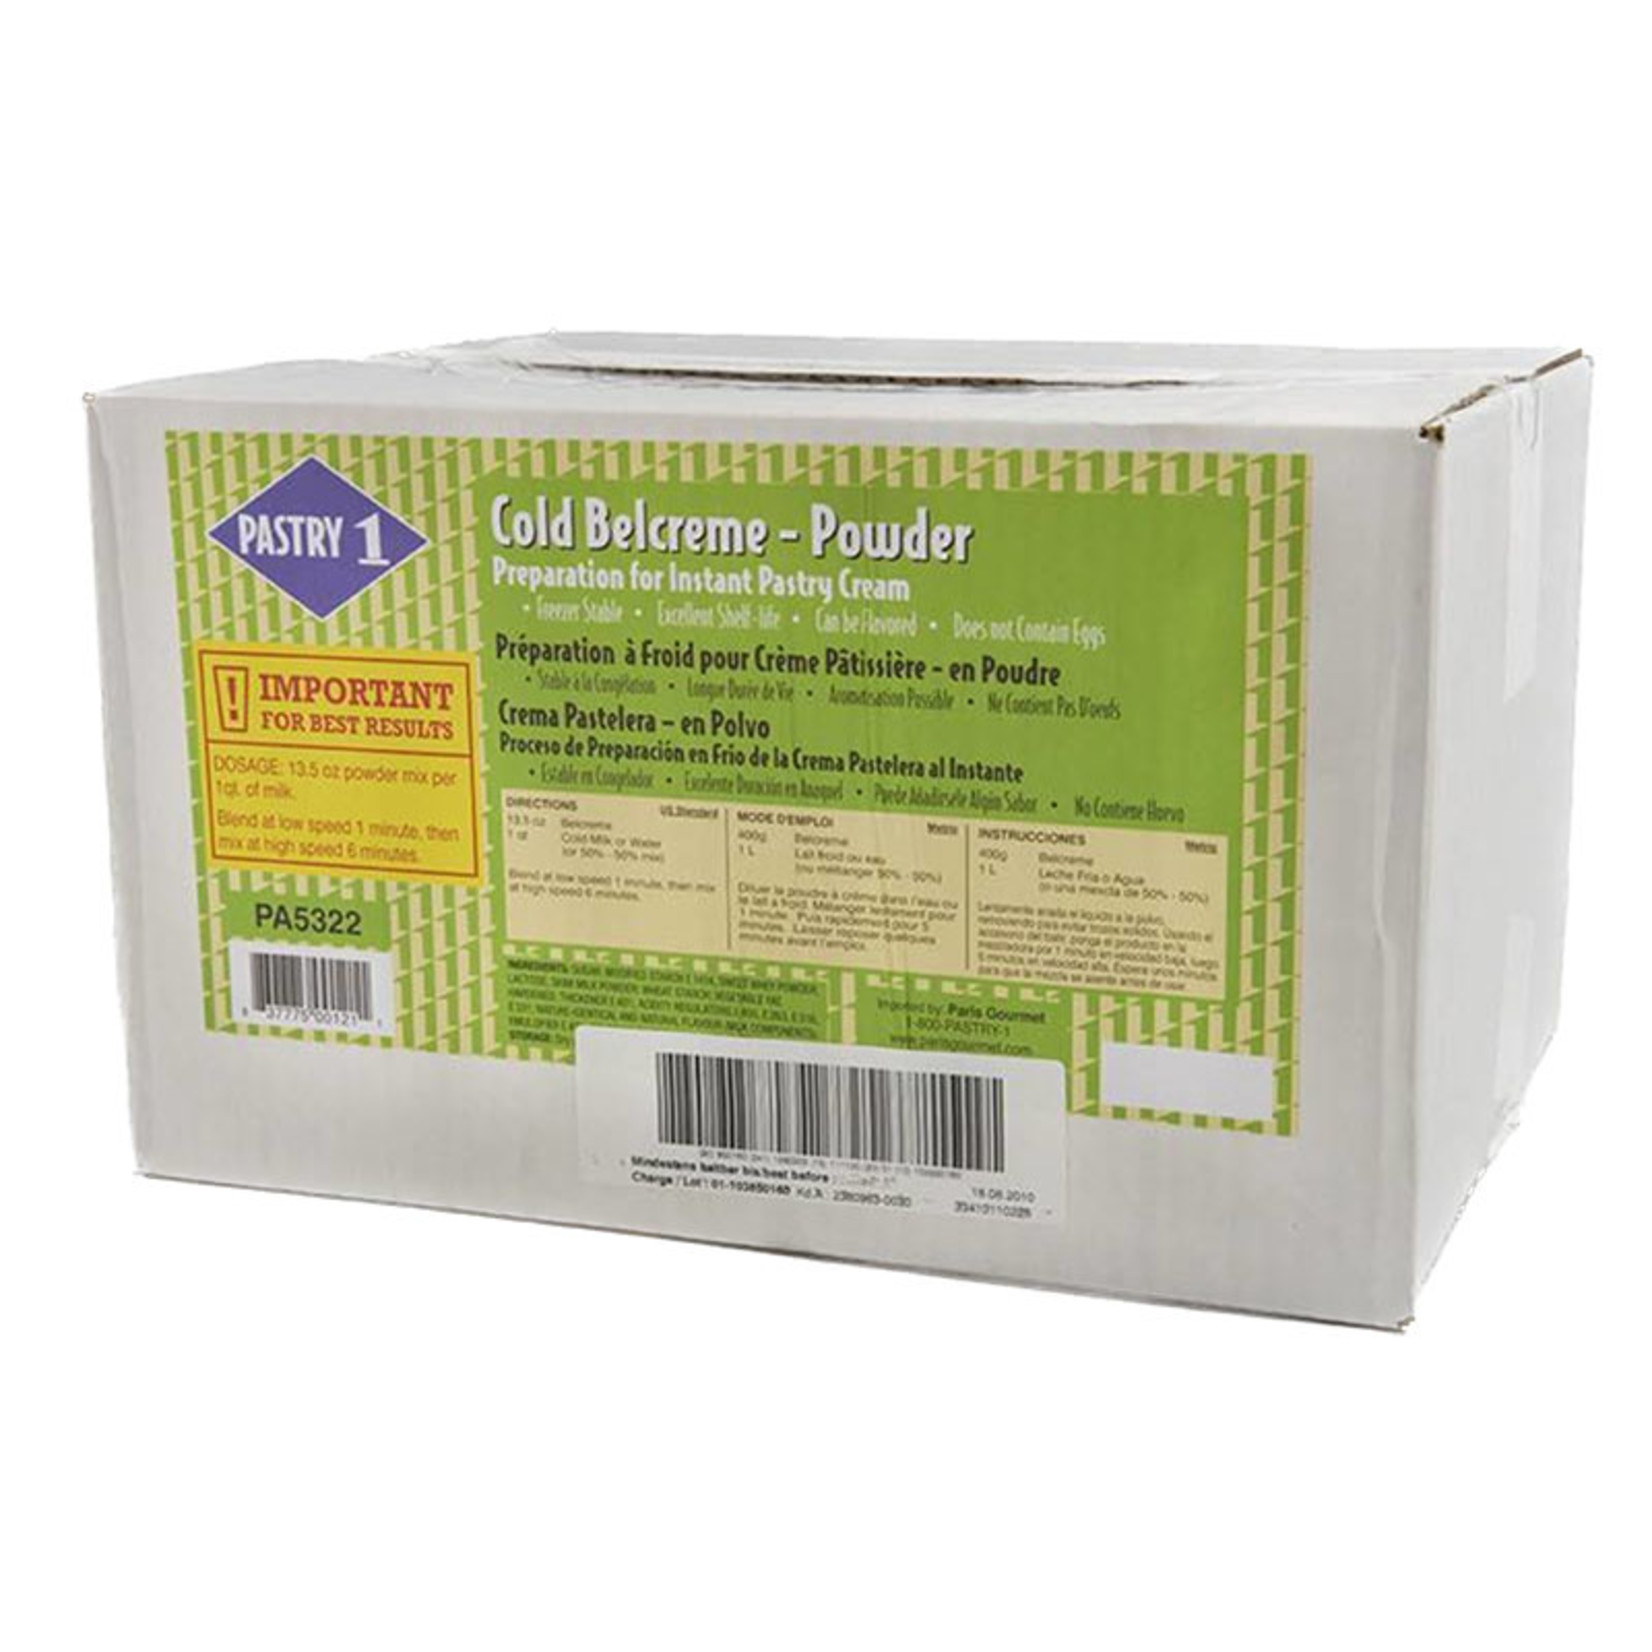 Pastry 1 Pastry 1 - Pastry cream mix, COLD process - 11 lb, PA5322